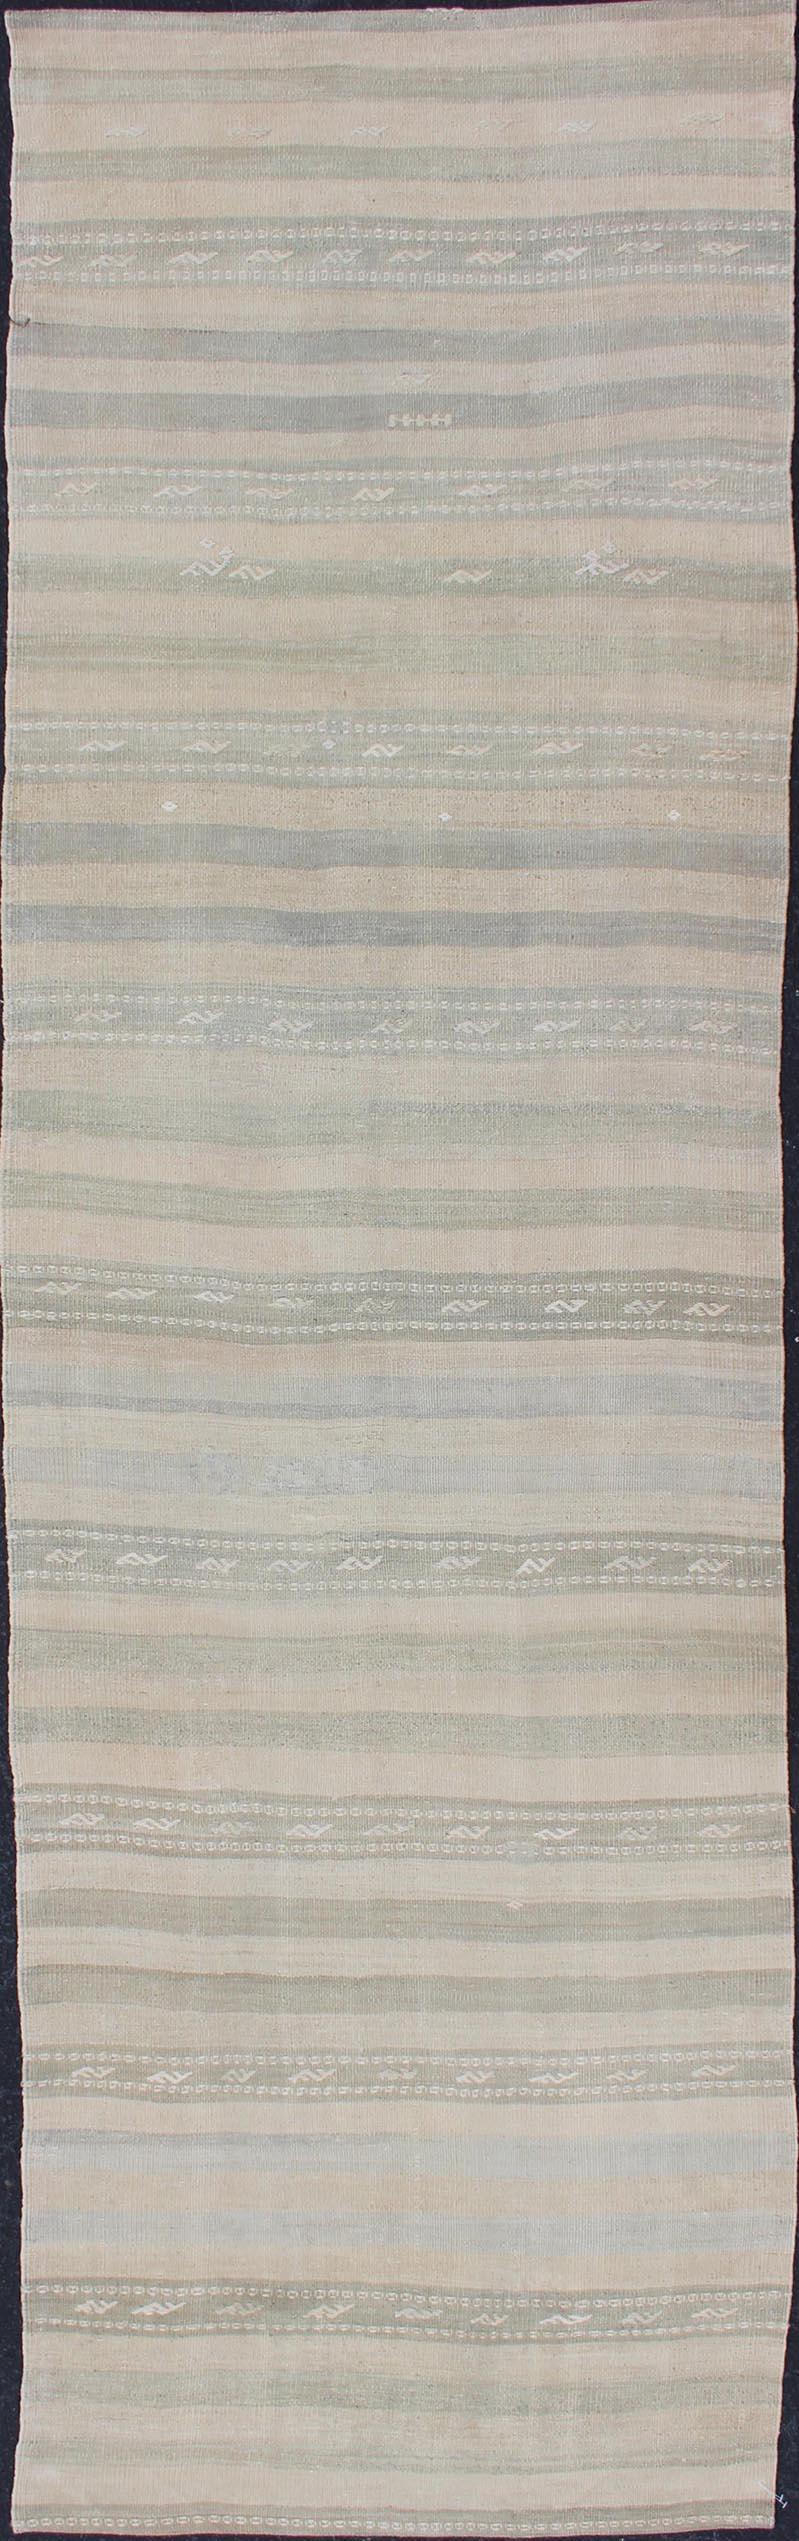 Hand-Woven Vintage Turkish Kilim Runner with Stripes in Light Taupe and Neutral Tones For Sale